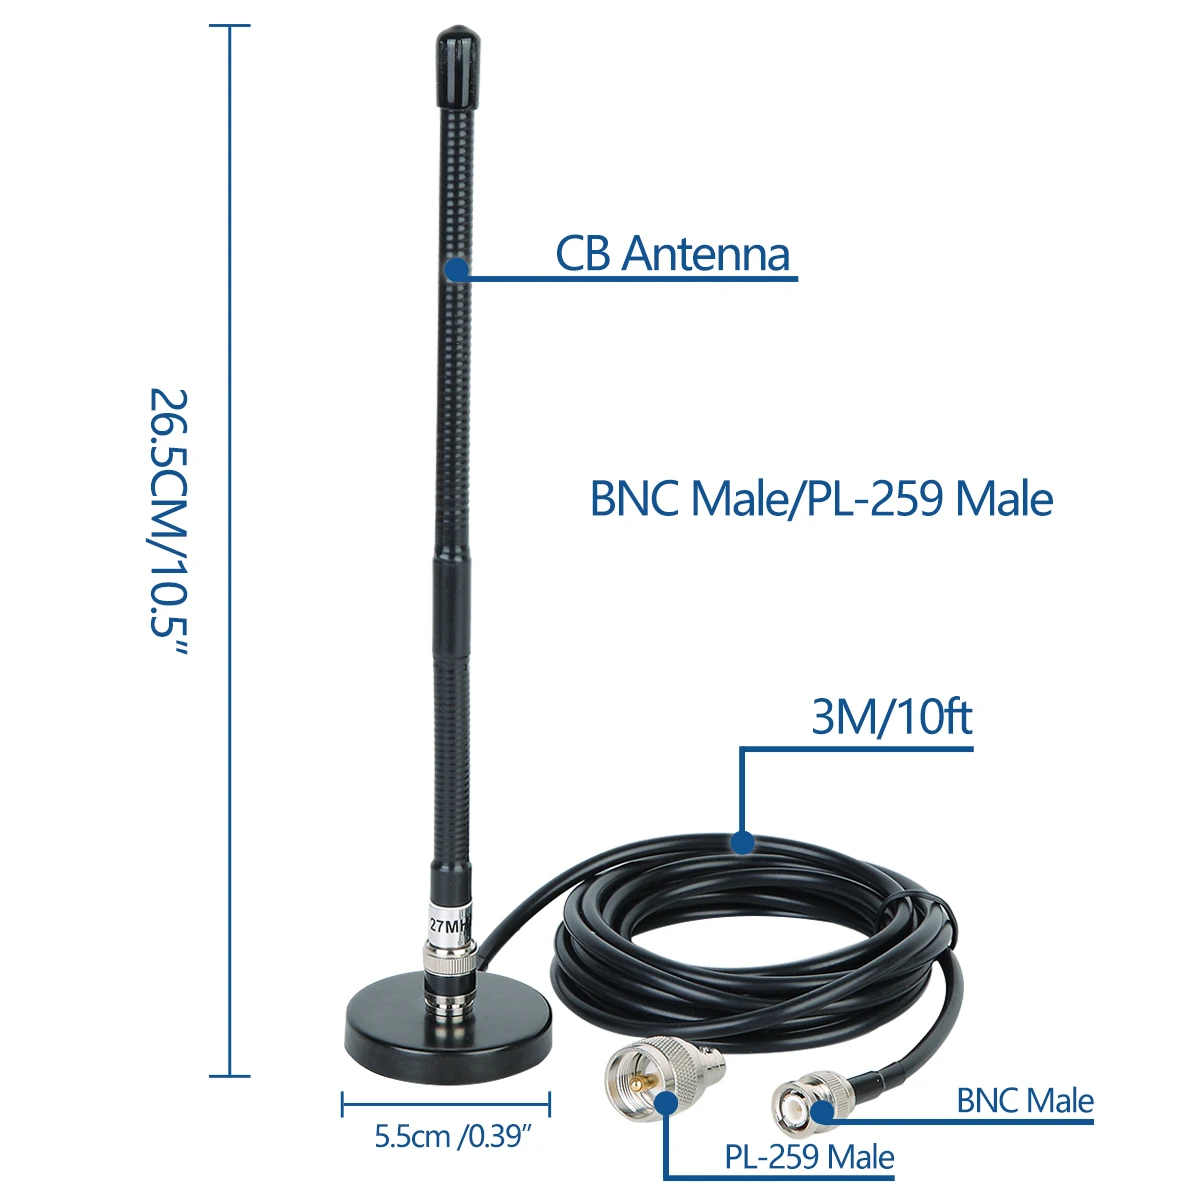 HYS 27Mhz Antenna 9-Inch to 51-inch Telescopic/Rod HT Antennas for CB Handheld/Portable Radio with BNC Connector Compatible with Cobra Midland Uniden Anytone CB Radio 